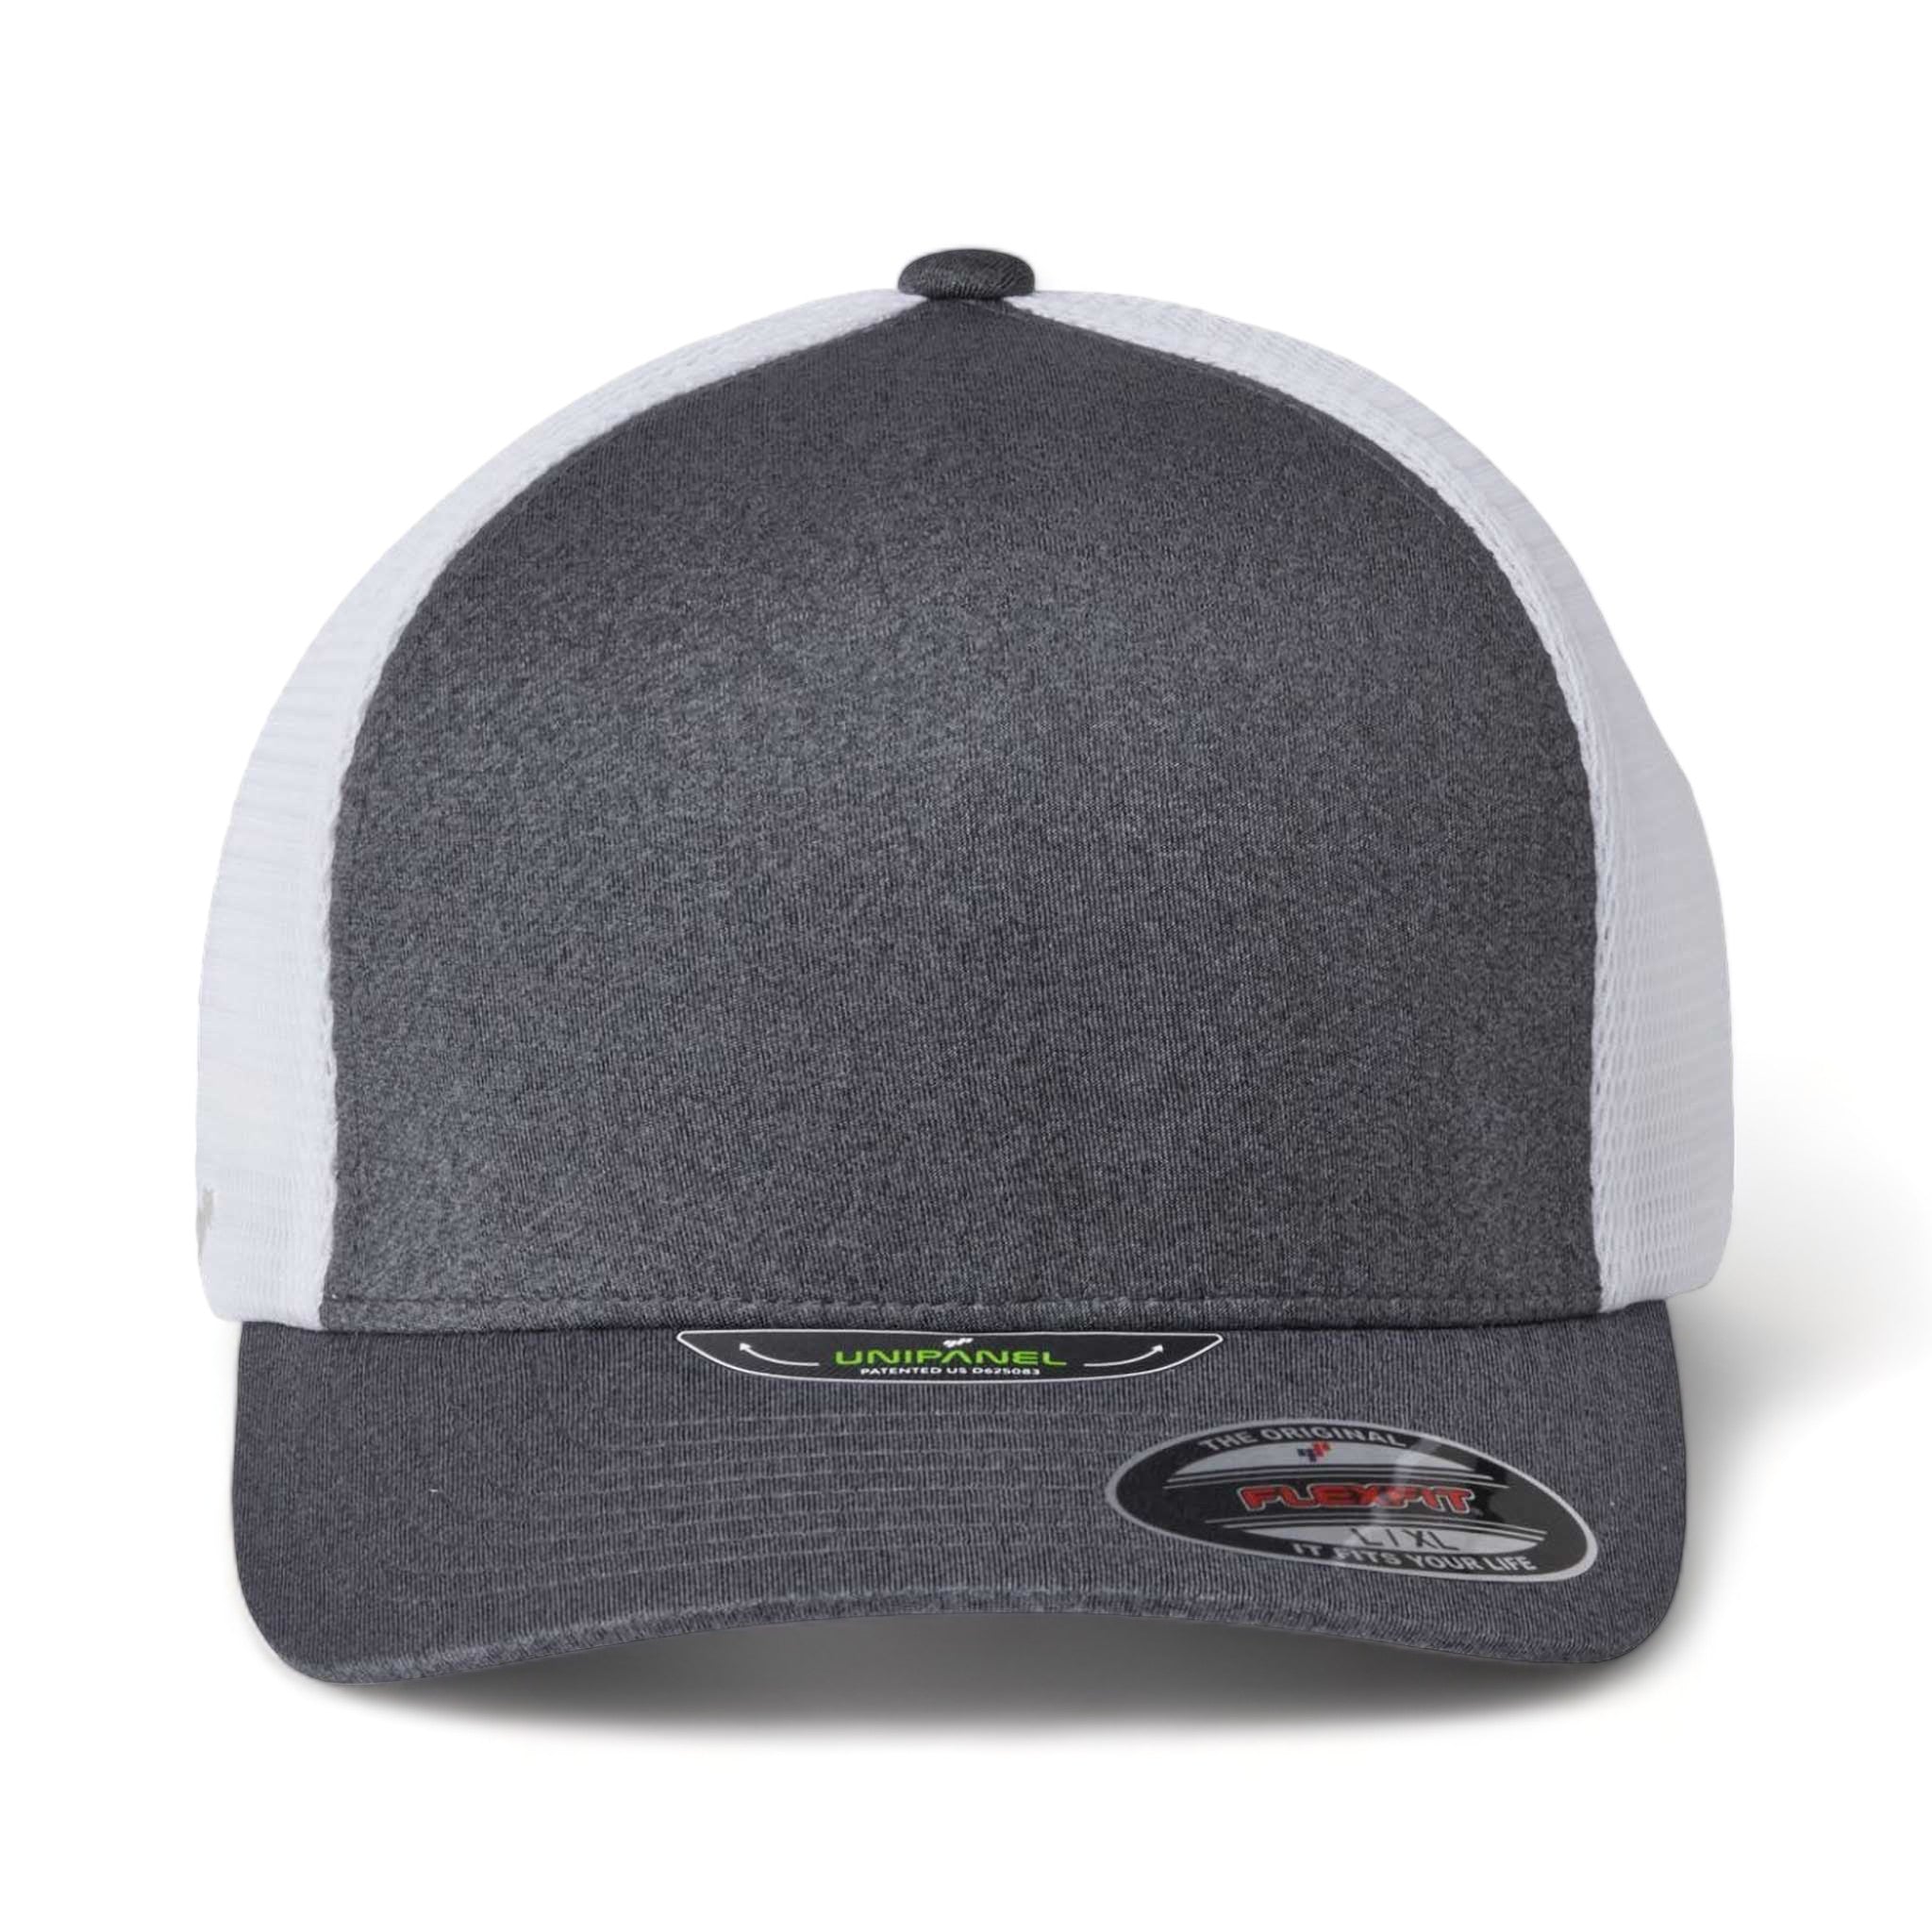 Front view of Flexfit 5511UP custom hat in mélange dark grey and white